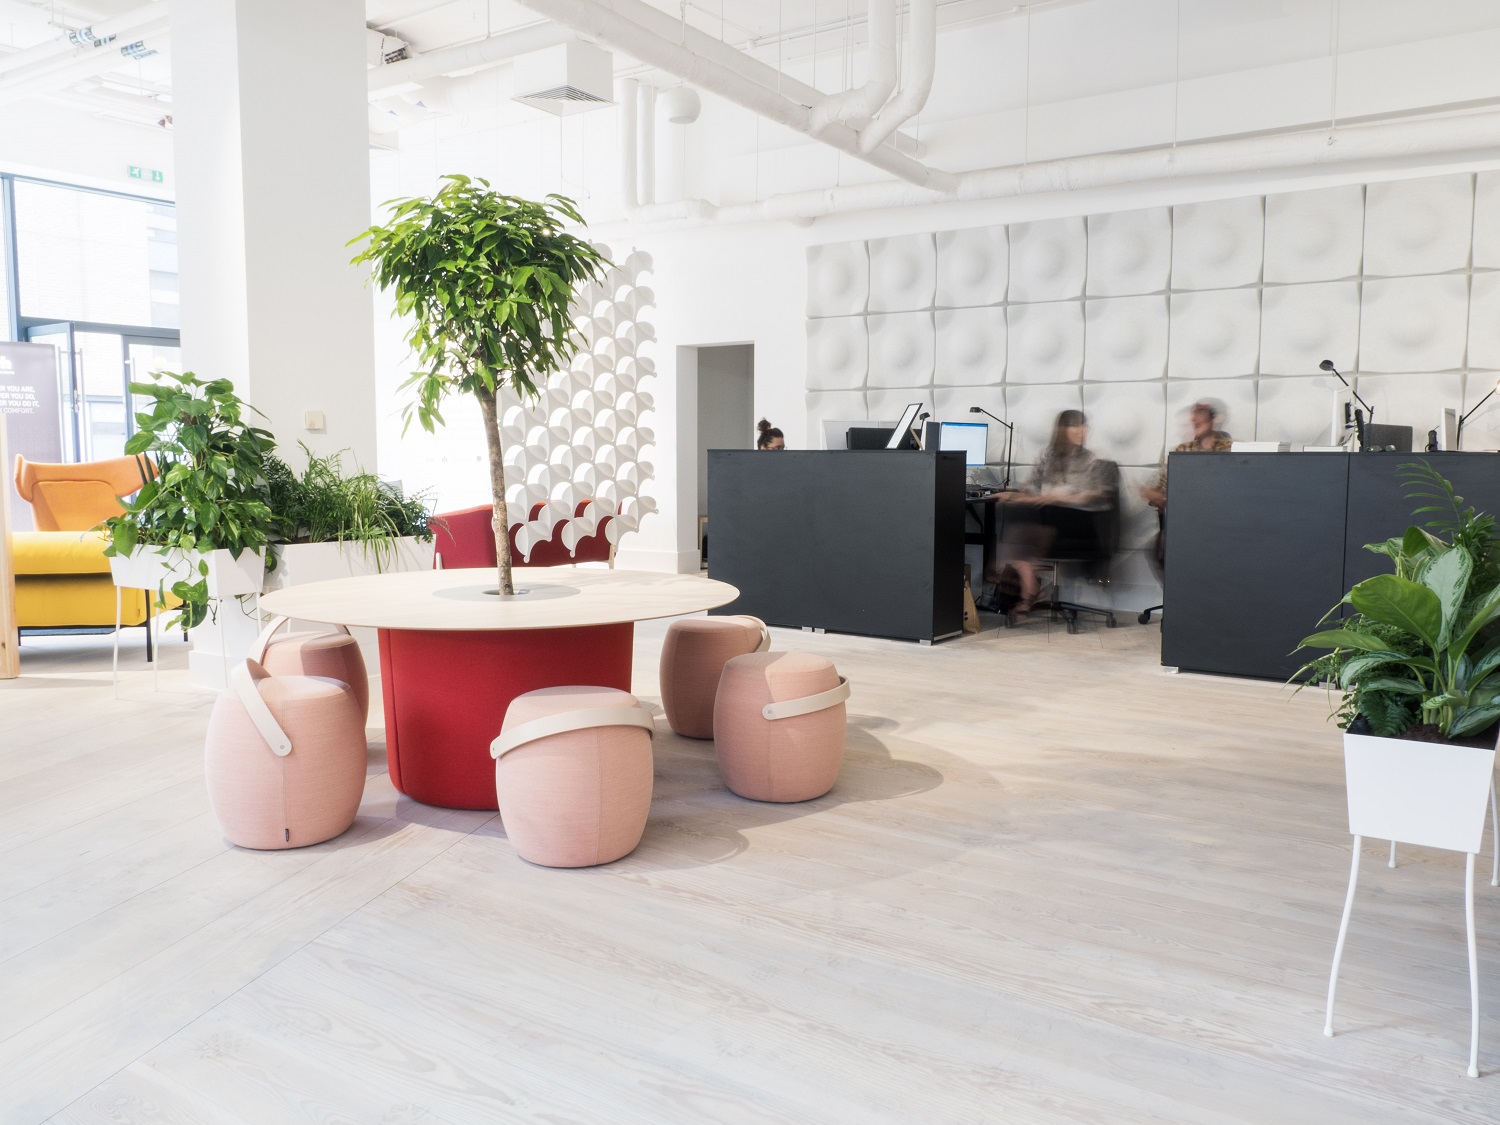 Flokk showrtoom in London featuring offecct furniture and white walls